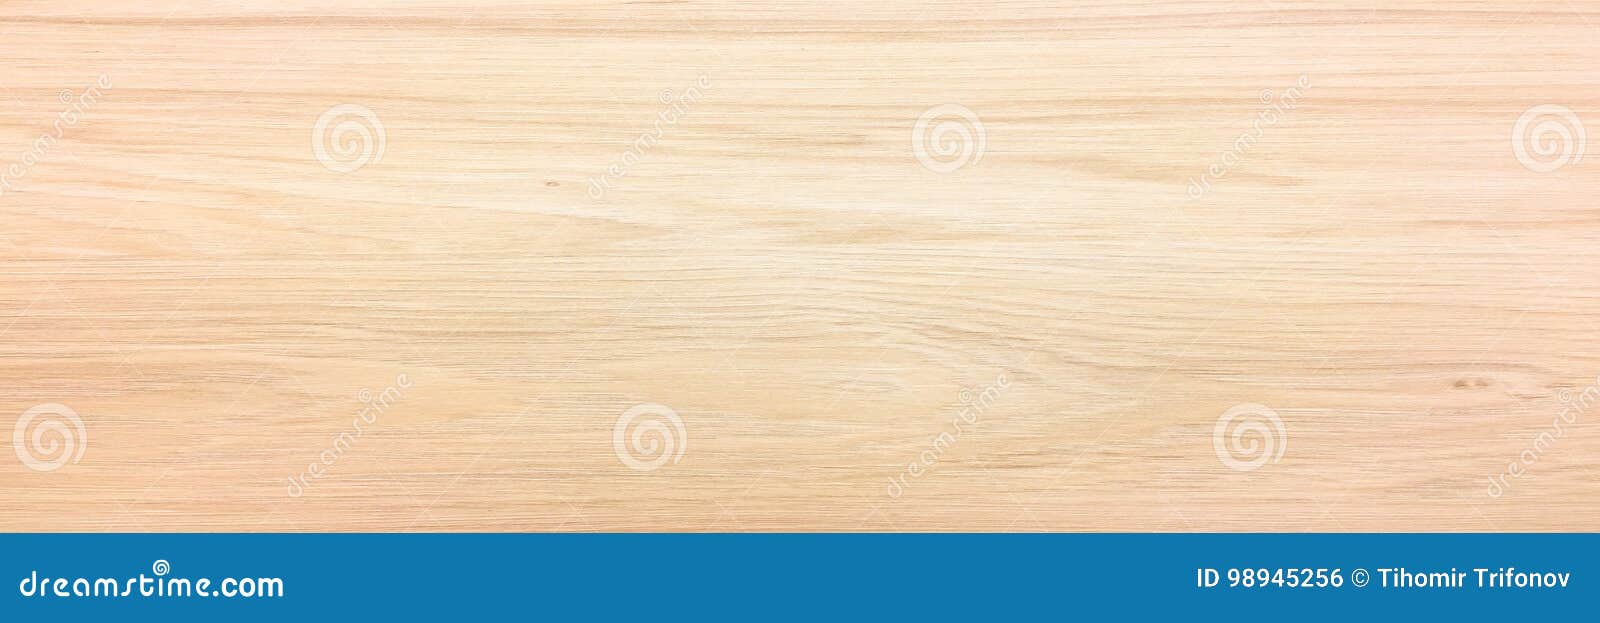 light wood texture background surface with old natural pattern or old wood texture table top view. grain surface with wood texture